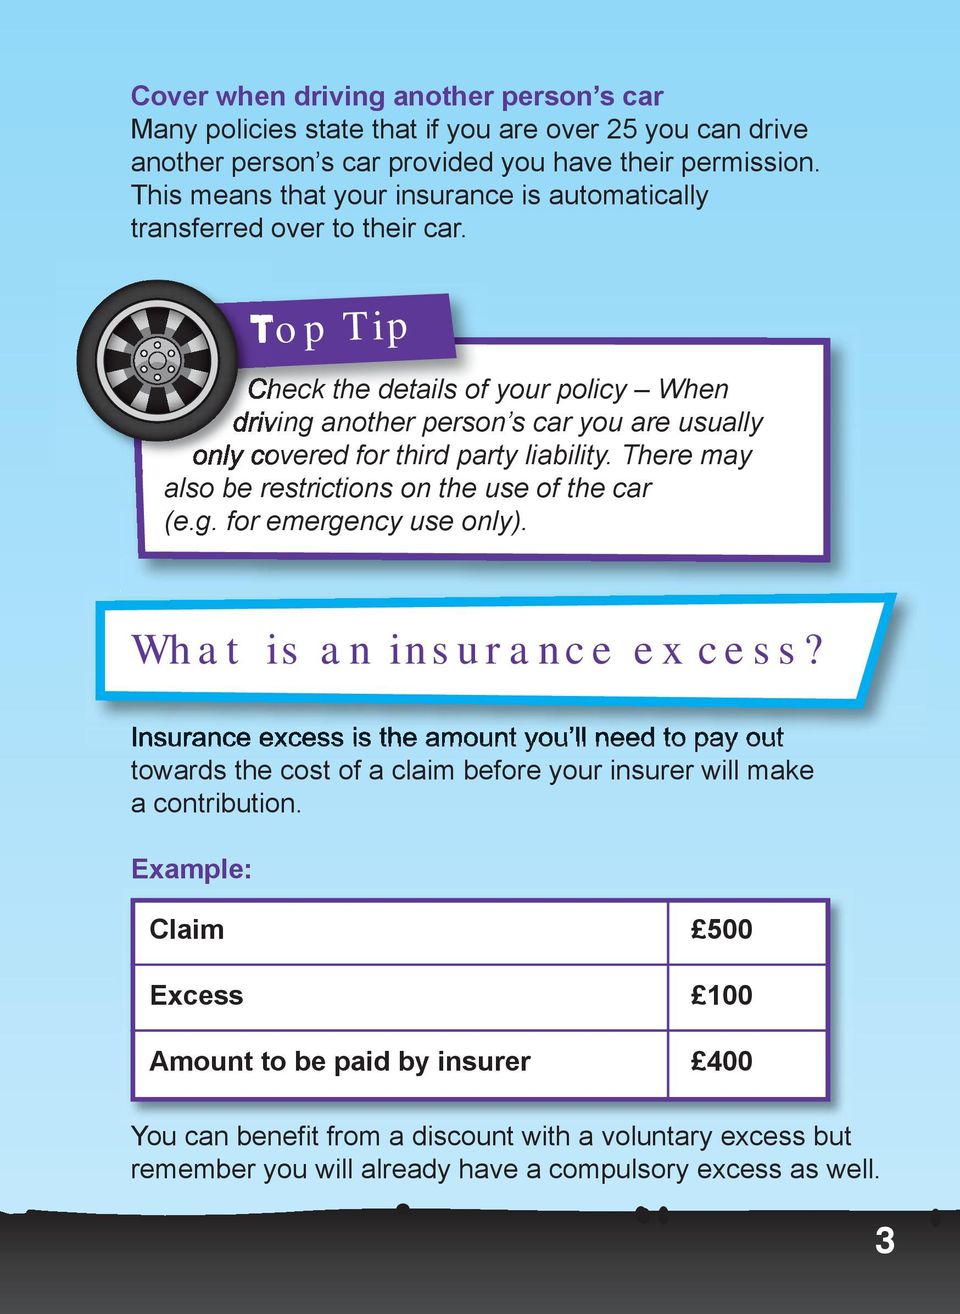 Top Tip Check the details of your policy When driving another person s car you are usually only covered for third party liability. There may also be restrictions on the use of the car (e.g. for emergency use only).